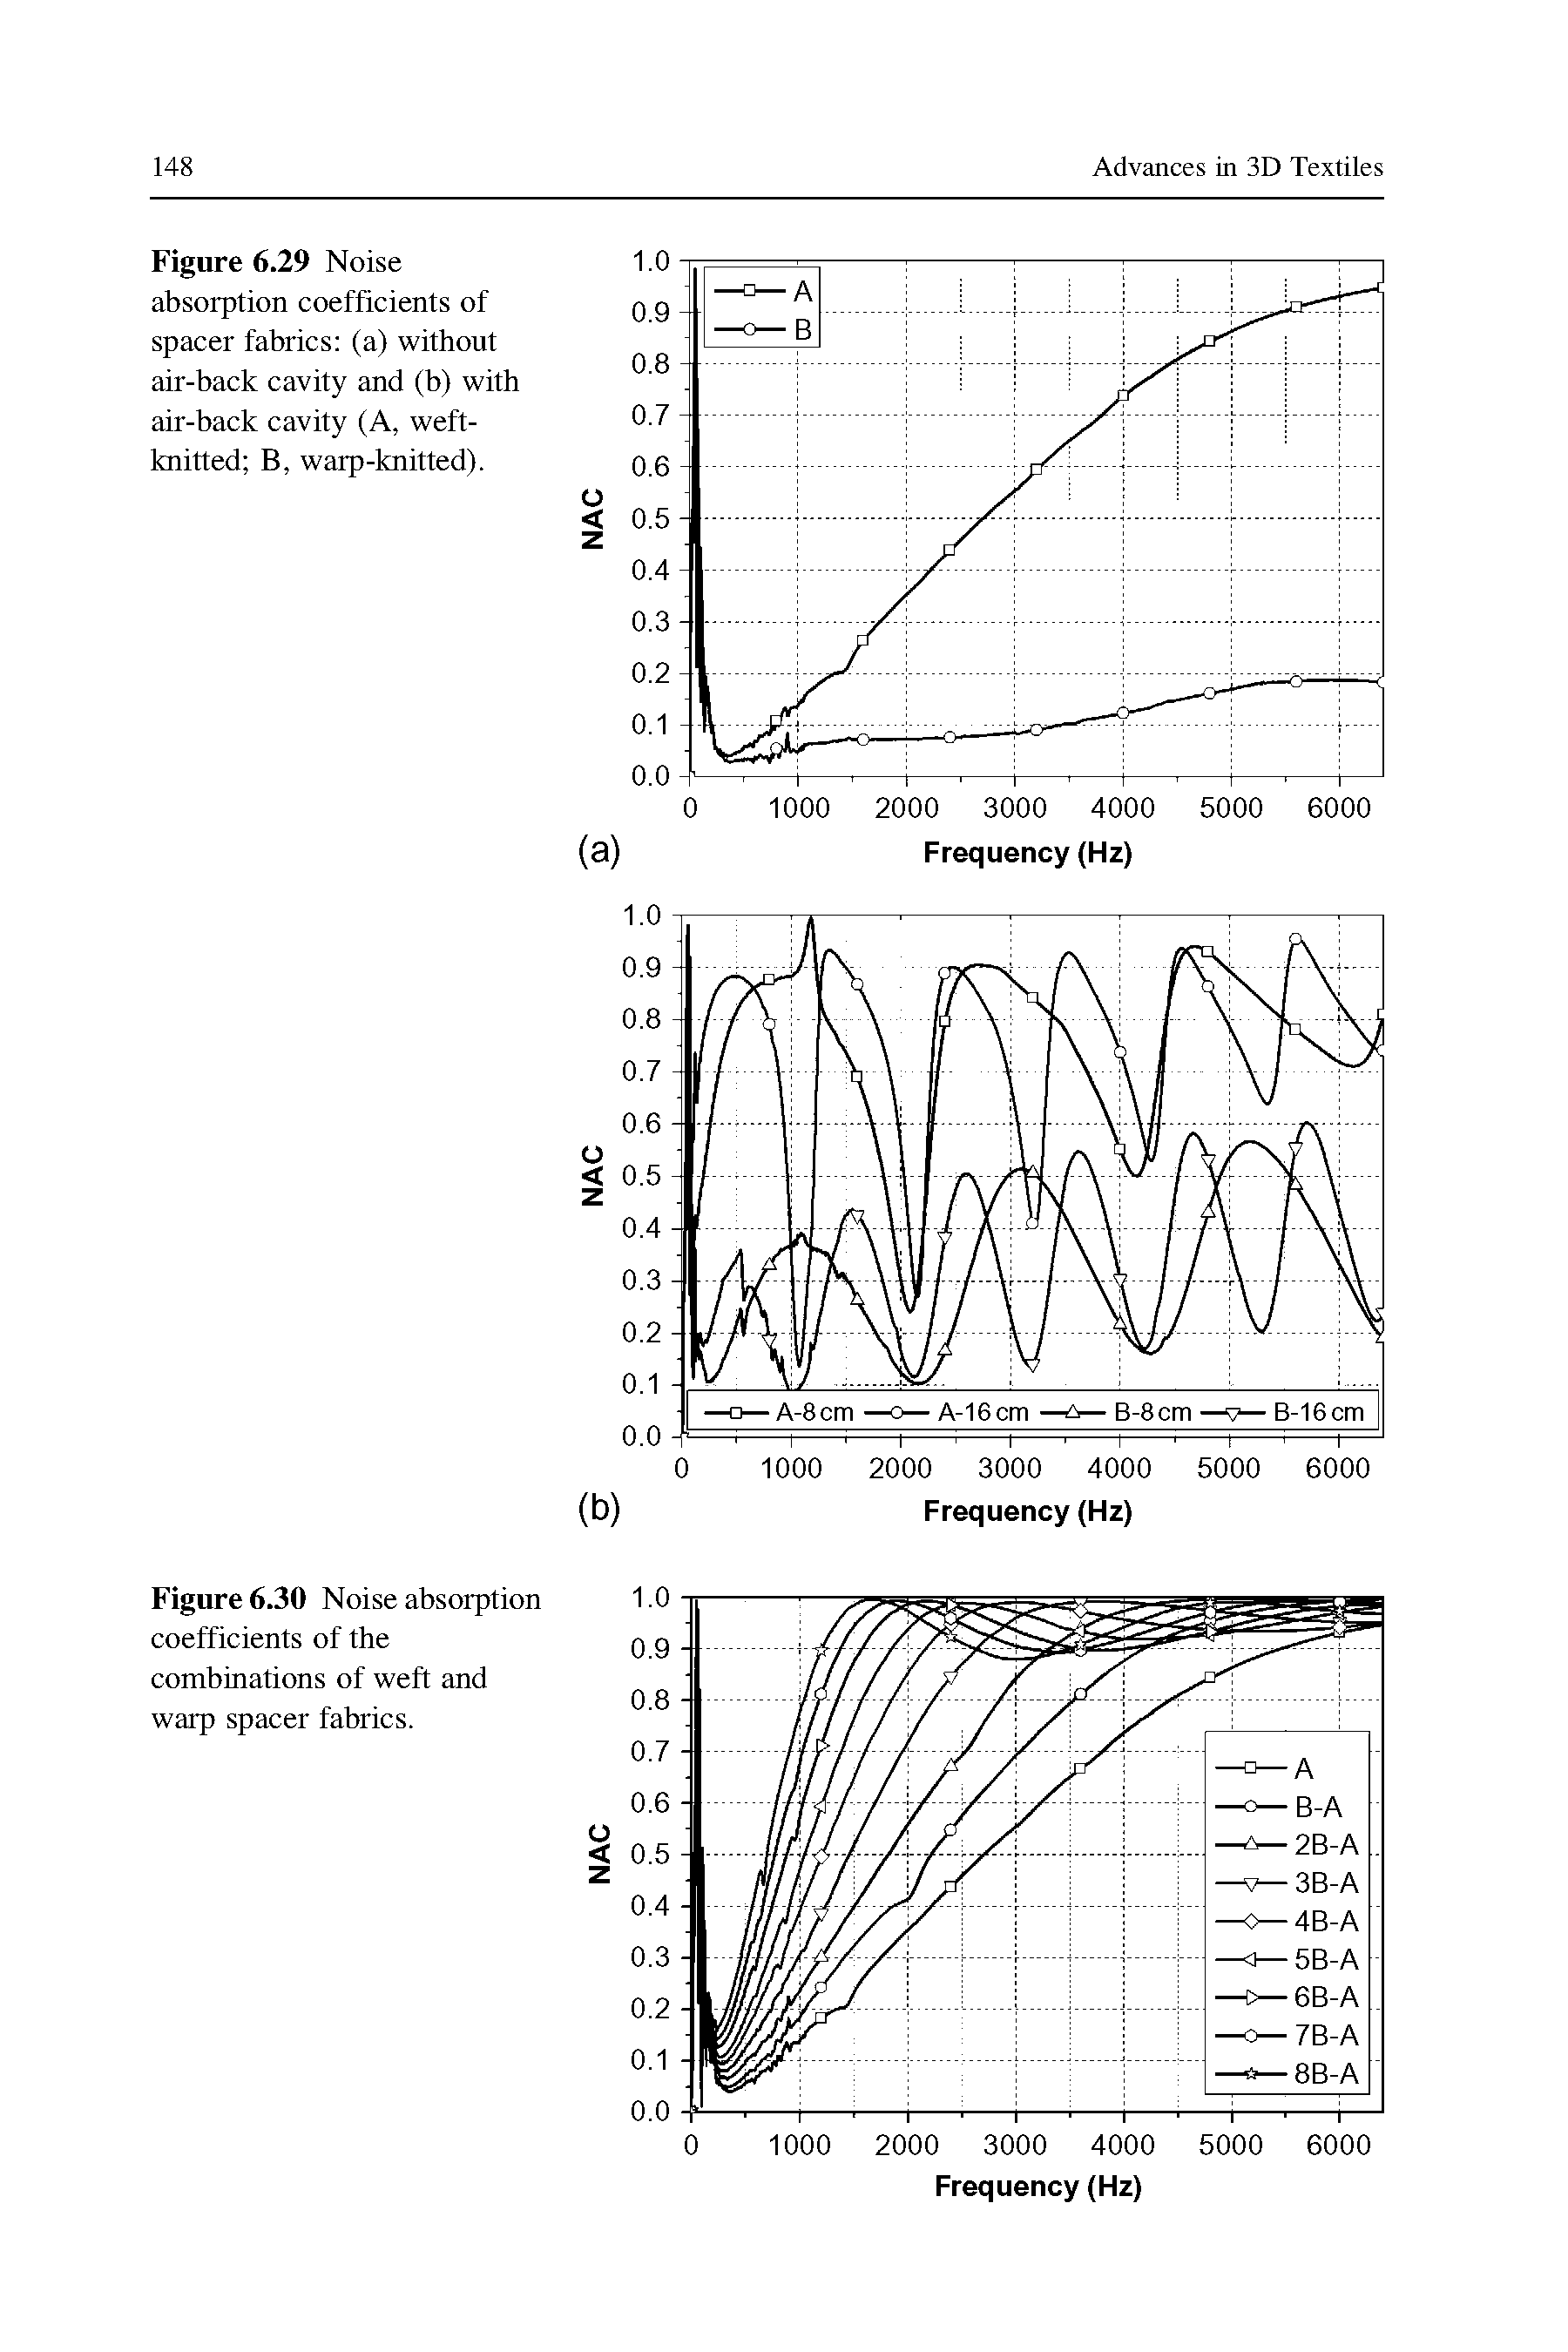 Figure 6.30 Noise absorption coefficients of the combinations of weft and warp spacer fabrics.